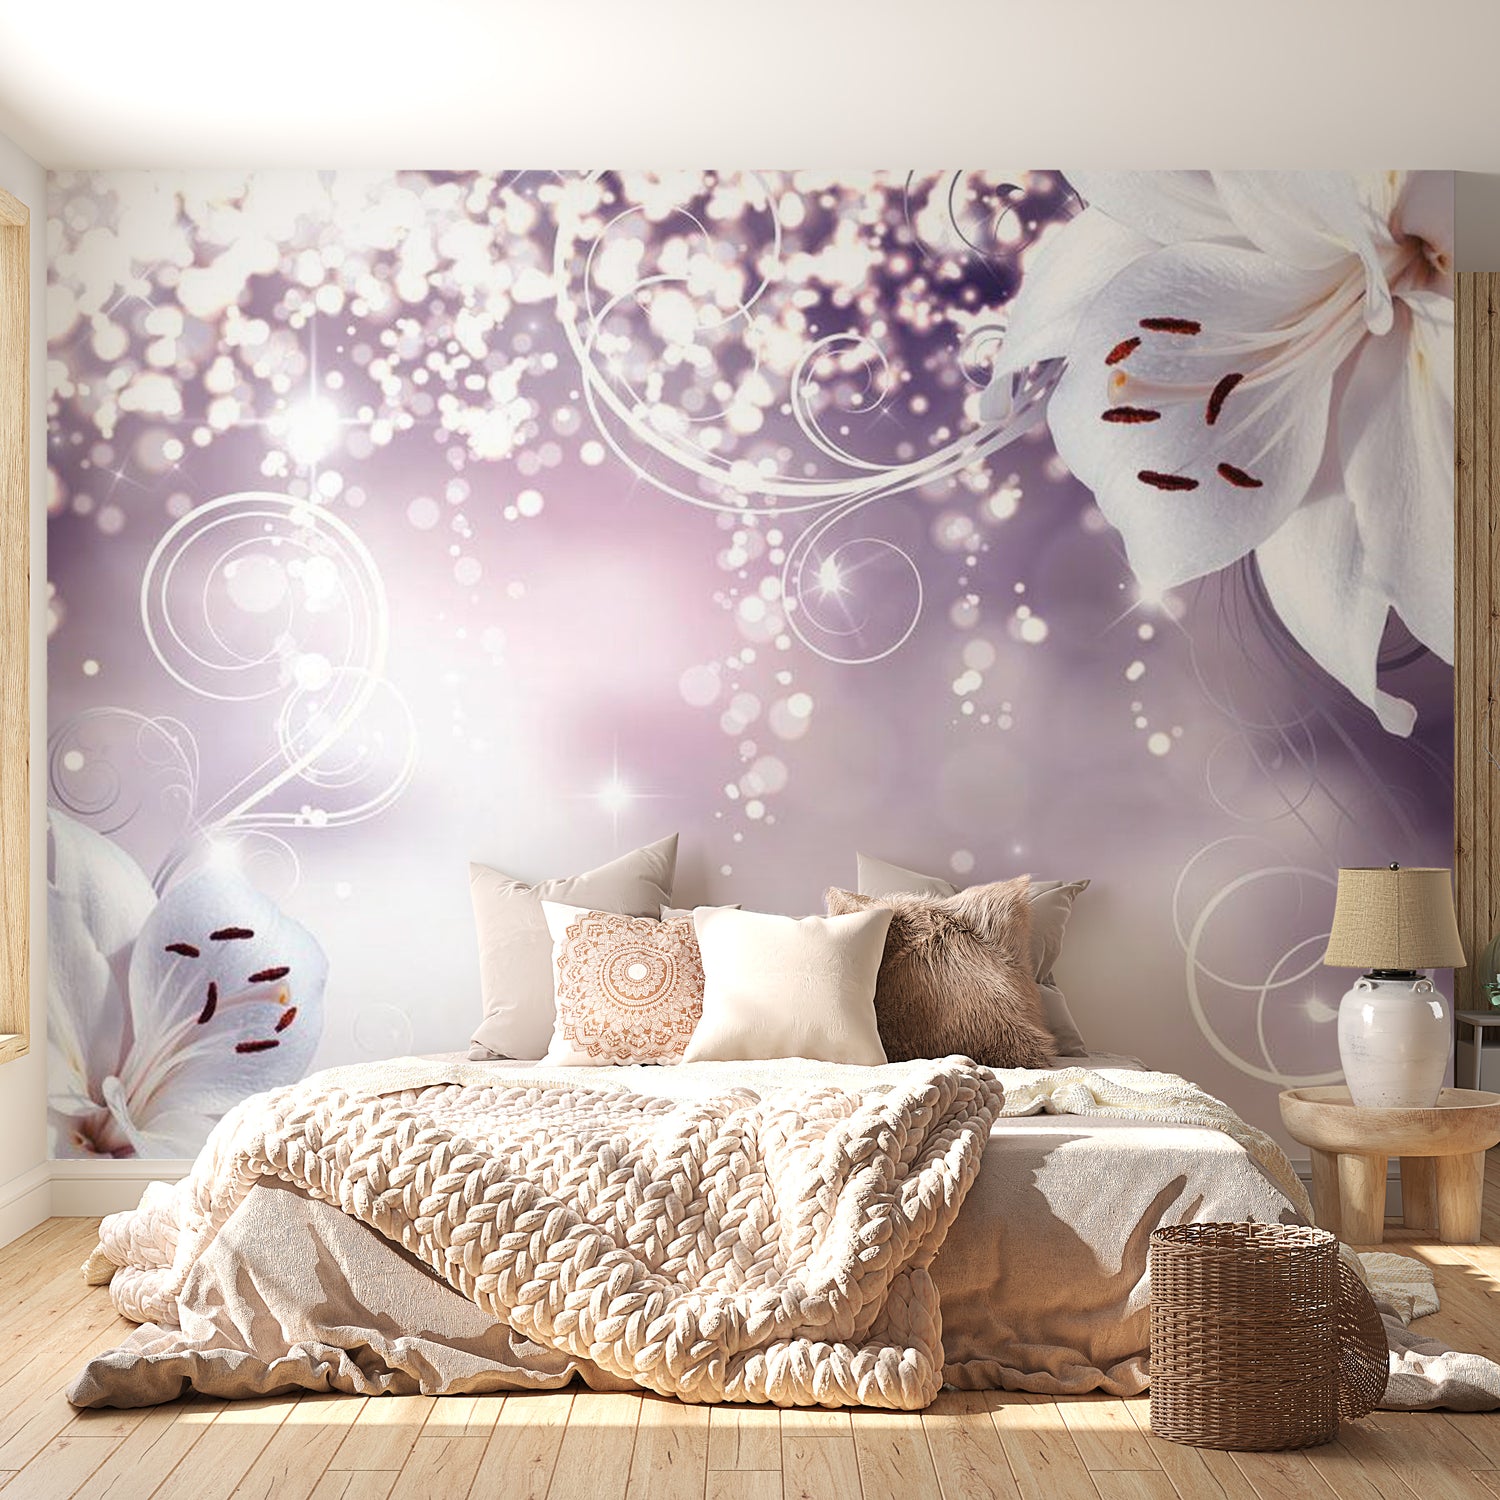 Peel & Stick Floral Wall Mural - Lilies And Glitters- Removable Wall Decals